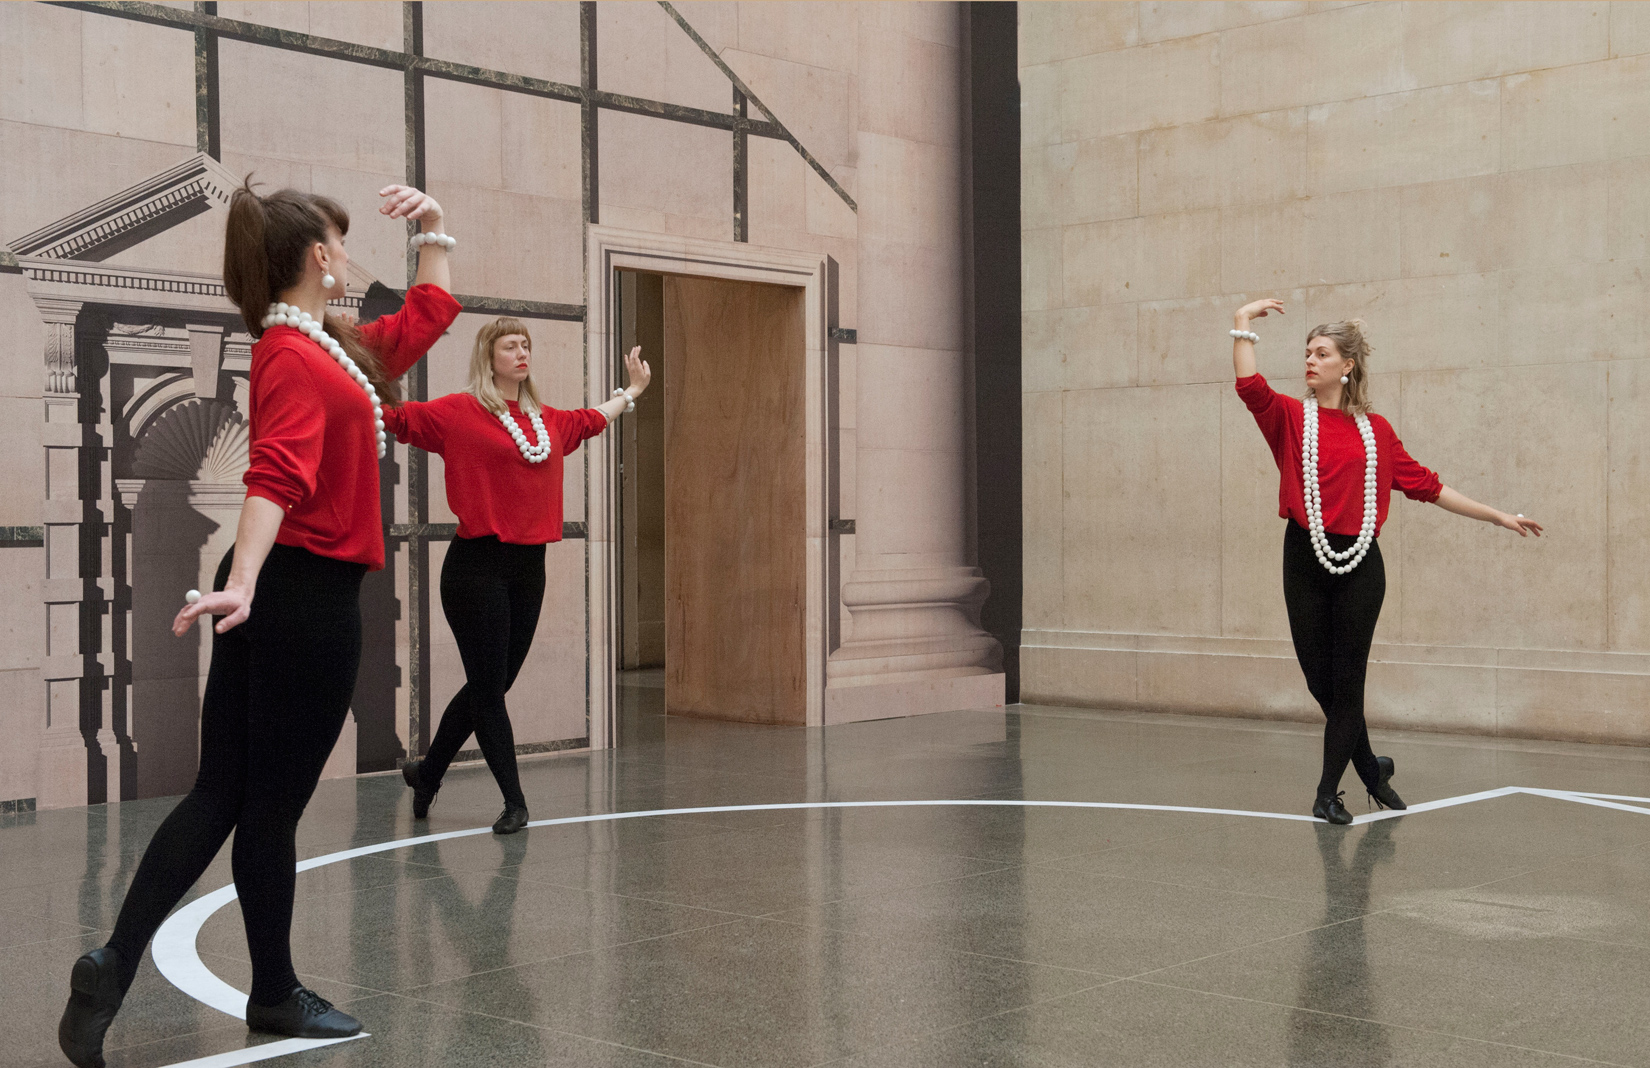 Pablo Bronstein's Historical Dances in an Antique Setting, 2016. Photograph: BrothertonLock © Pablo Bronstein. Courtesy of Tate Media